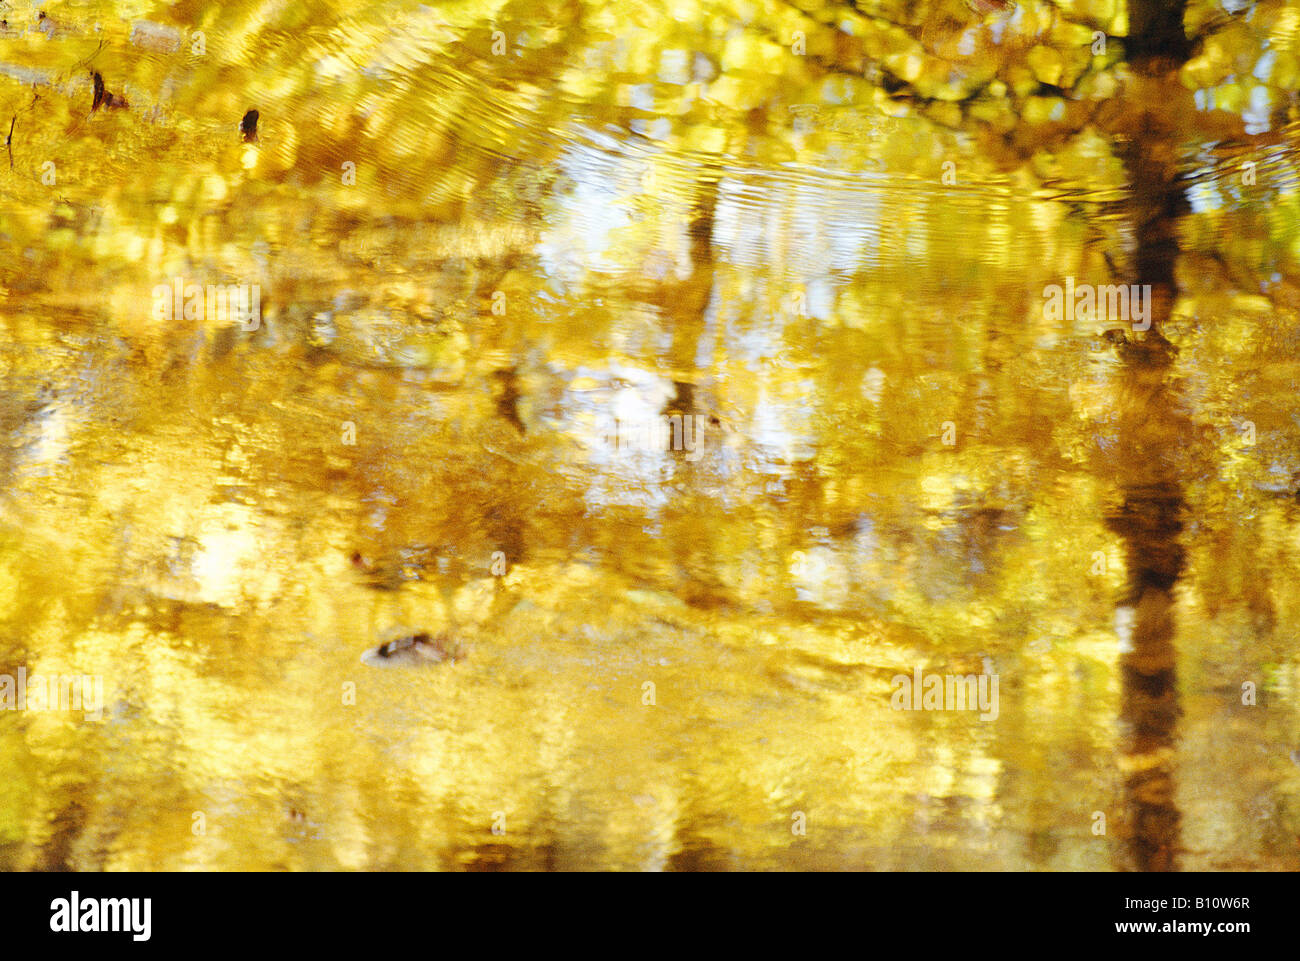 Golden reflection on water. Stock Photo